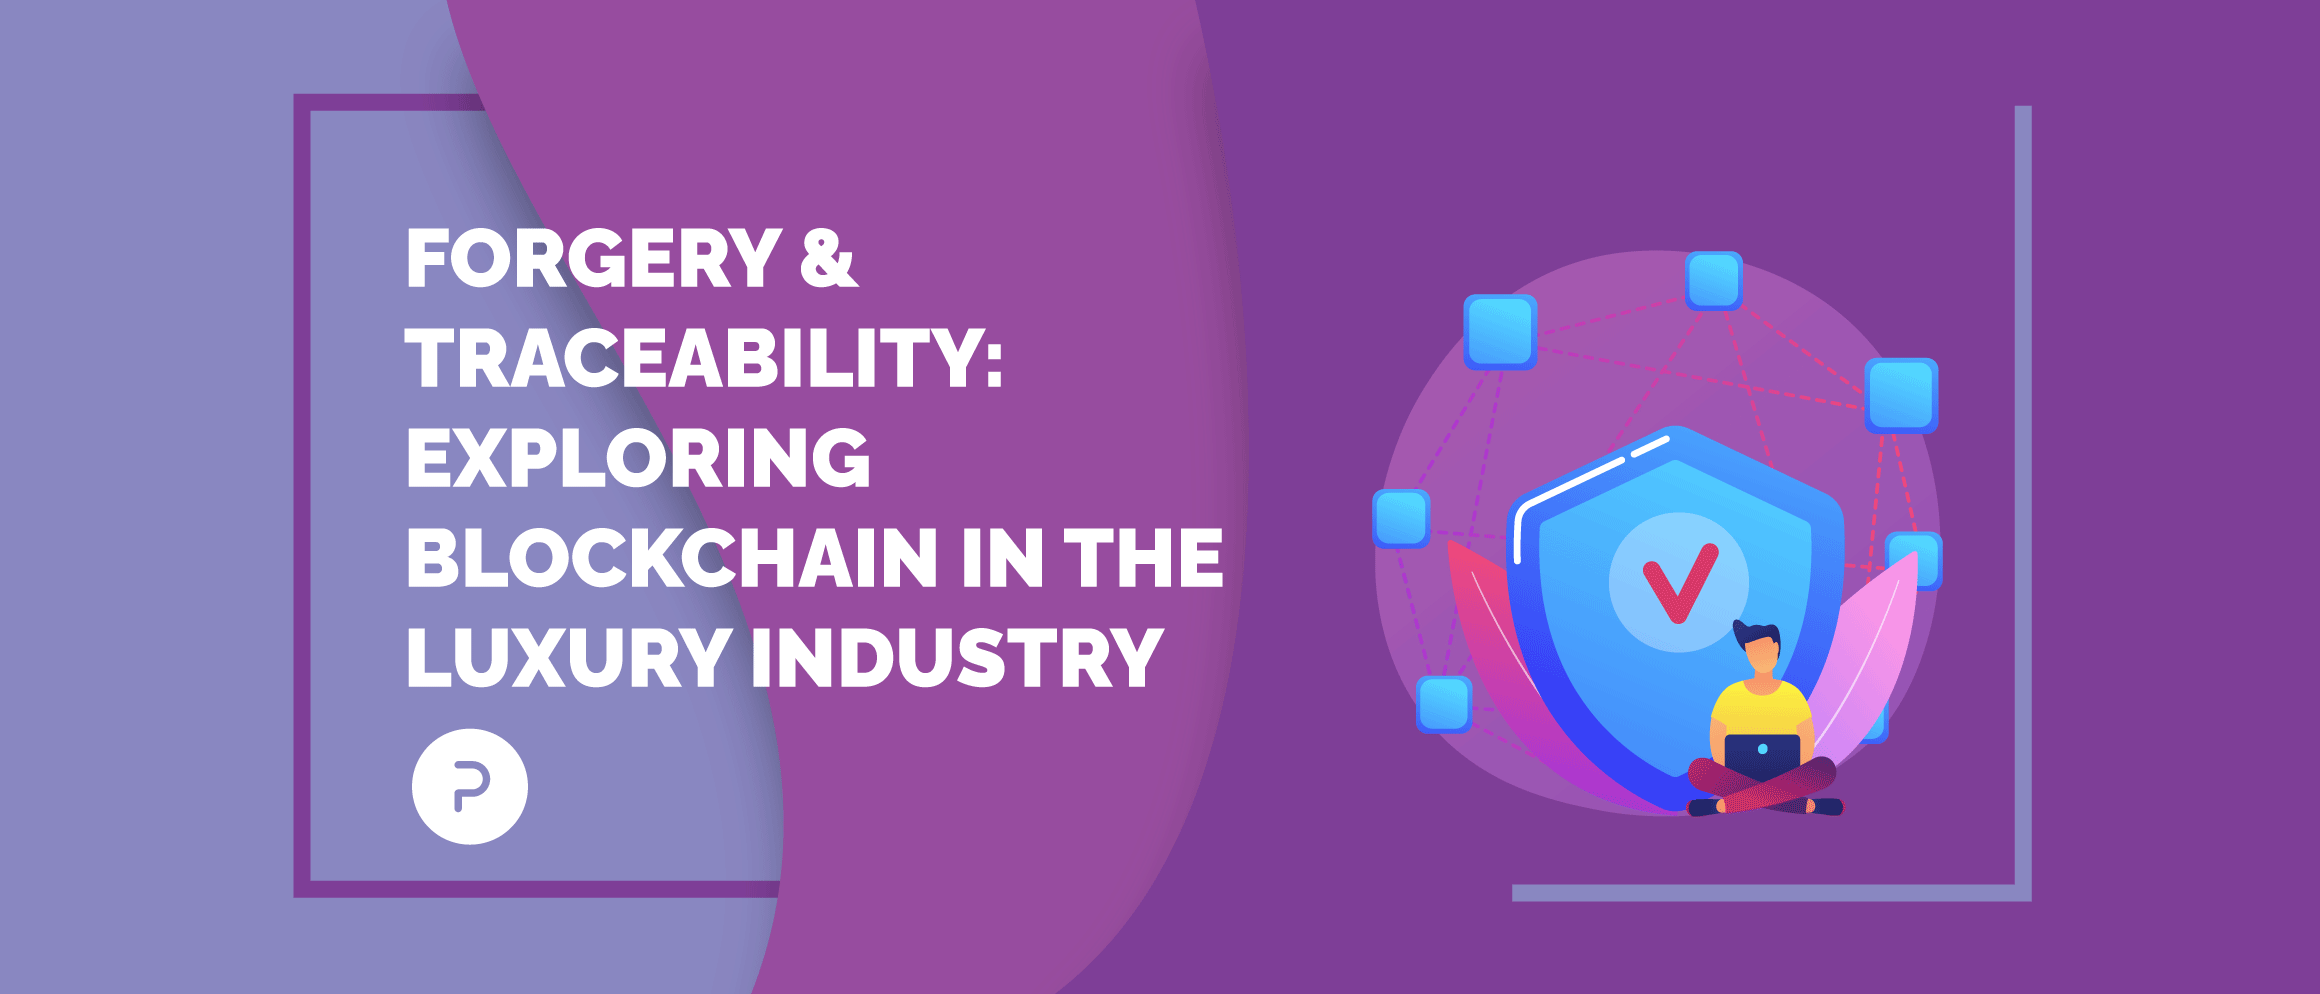 Forgery & traceability: Exploring blockchain in the luxury industry